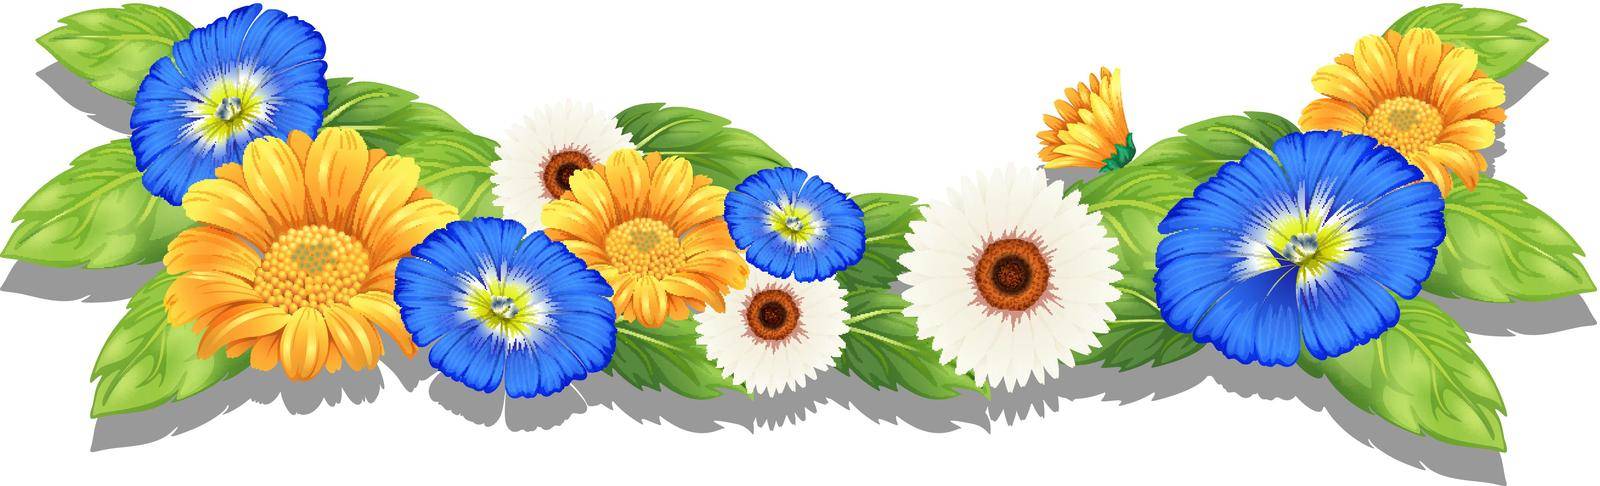 Illustration of the flowering plant with colourful flowers on a white background